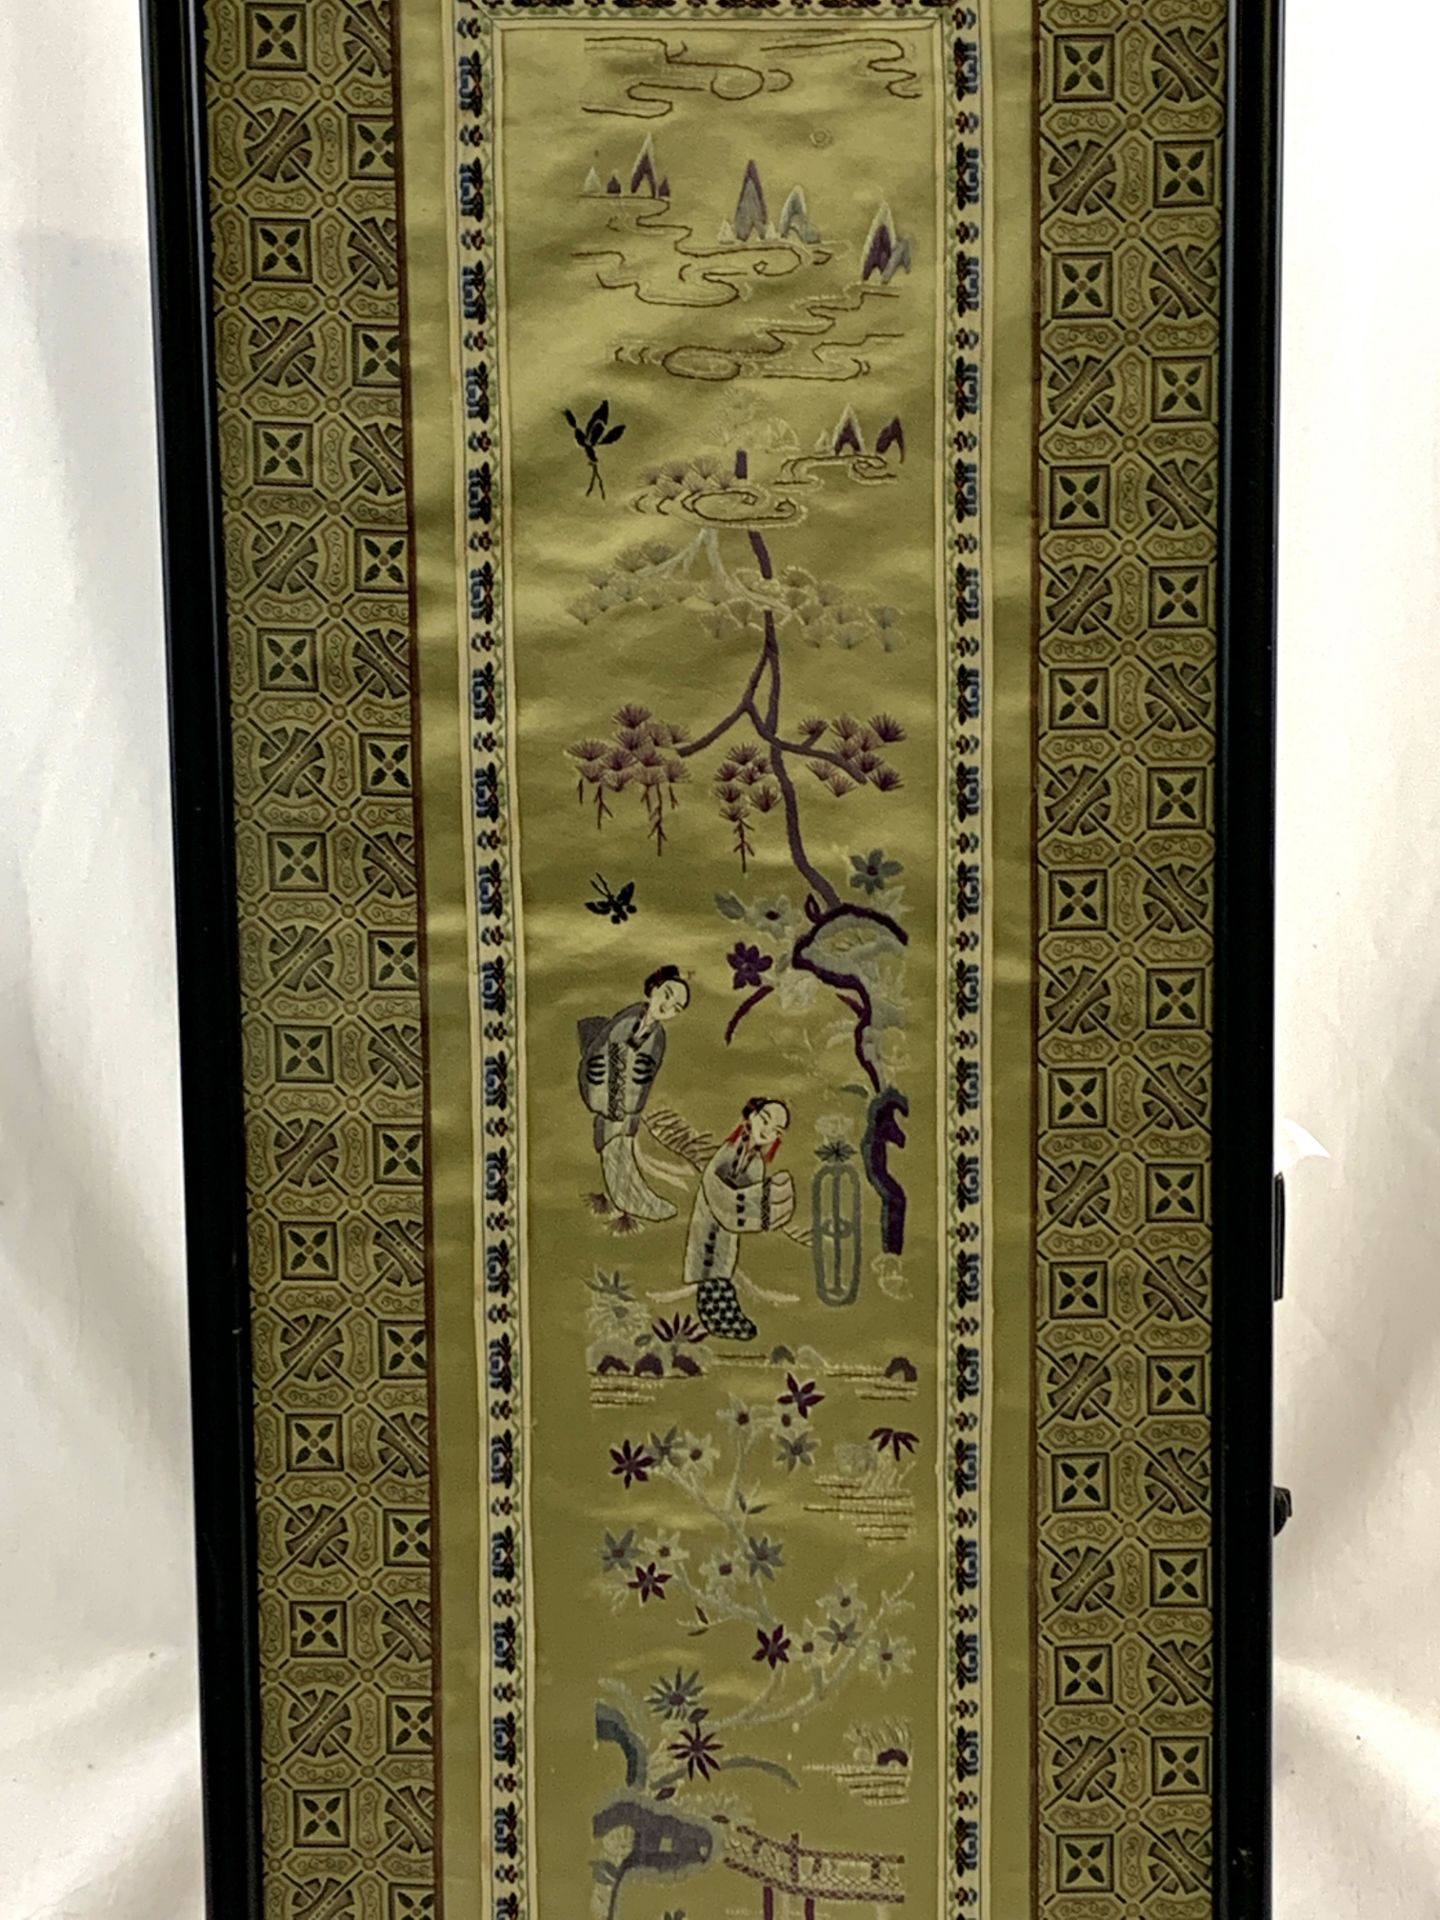 Framed and glazed Oriental embroidery on silk - Image 2 of 2